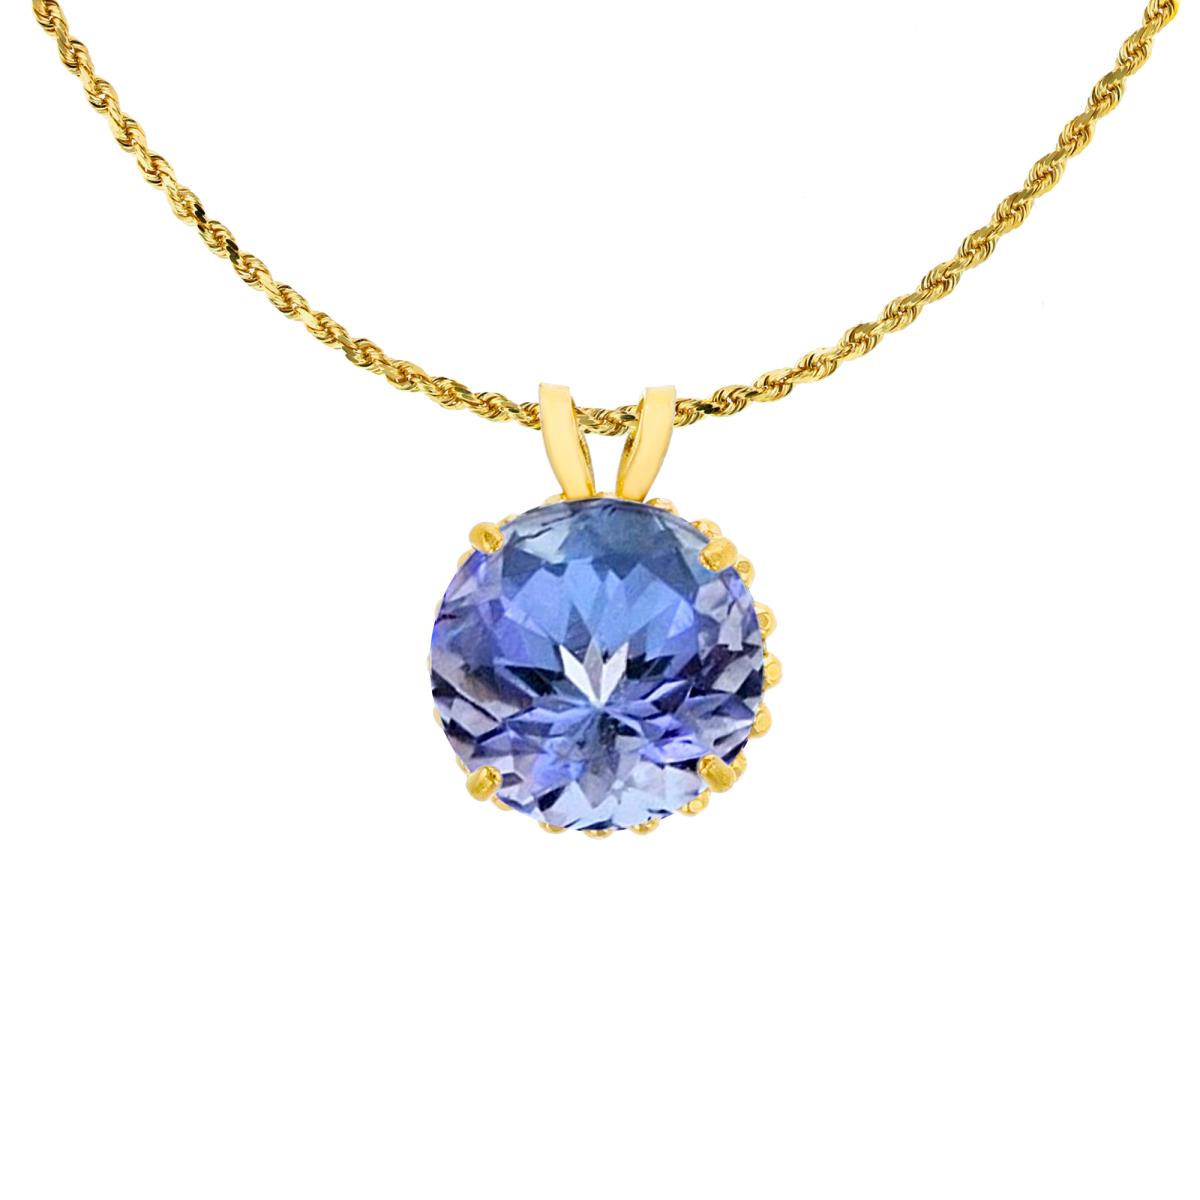 14K Yellow Gold 7mm Rd Cut Tanzanite with Bead Frame Rabbit Ear 18" Rope Chain Necklace